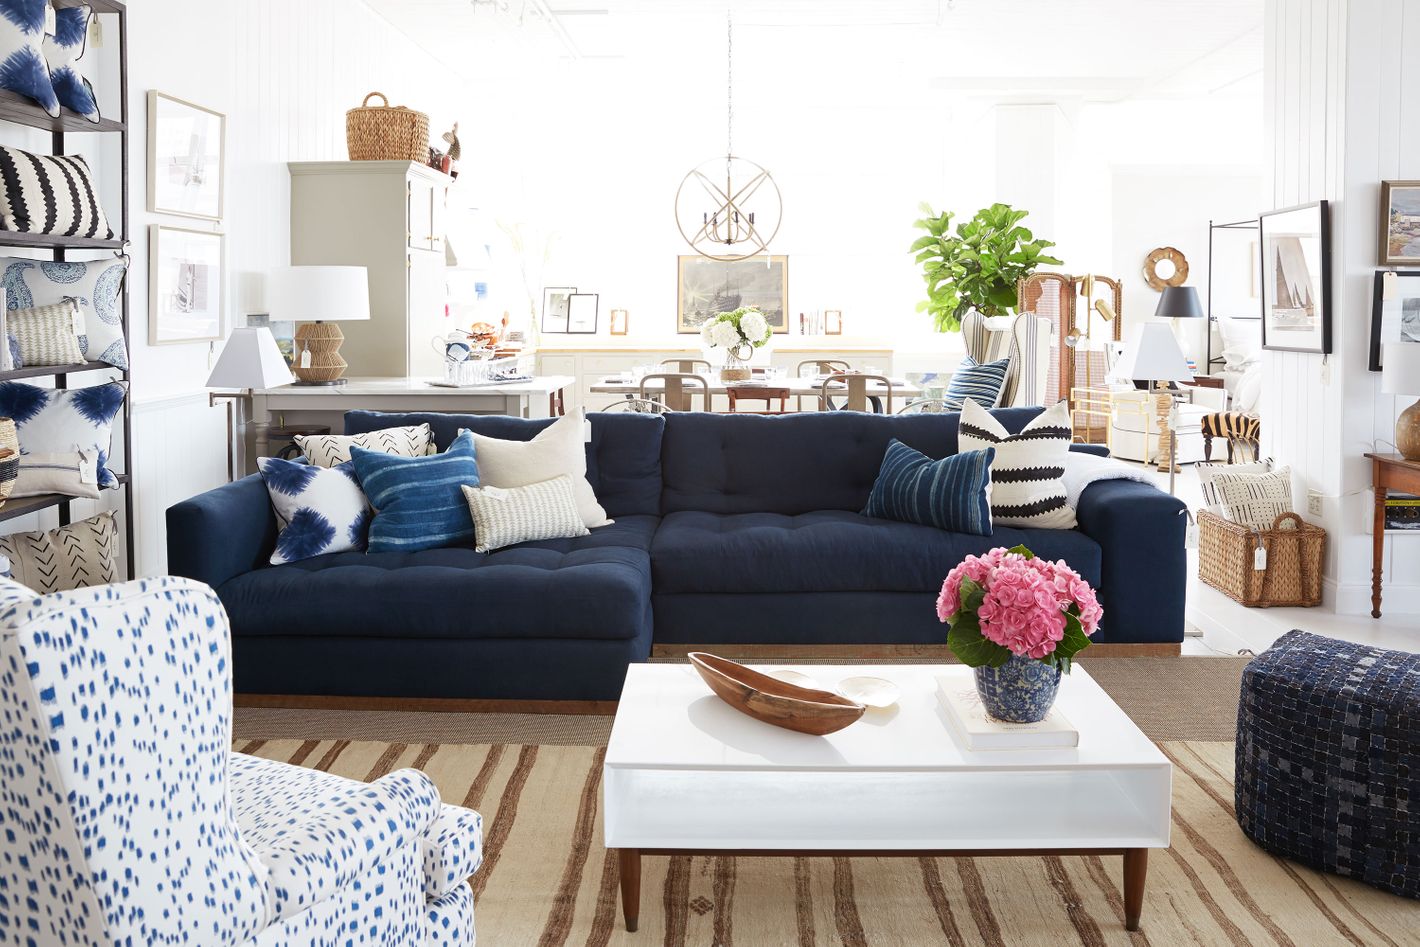 One Kings Lane Goes Brick-and-Mortar With This Shoppable Showroom